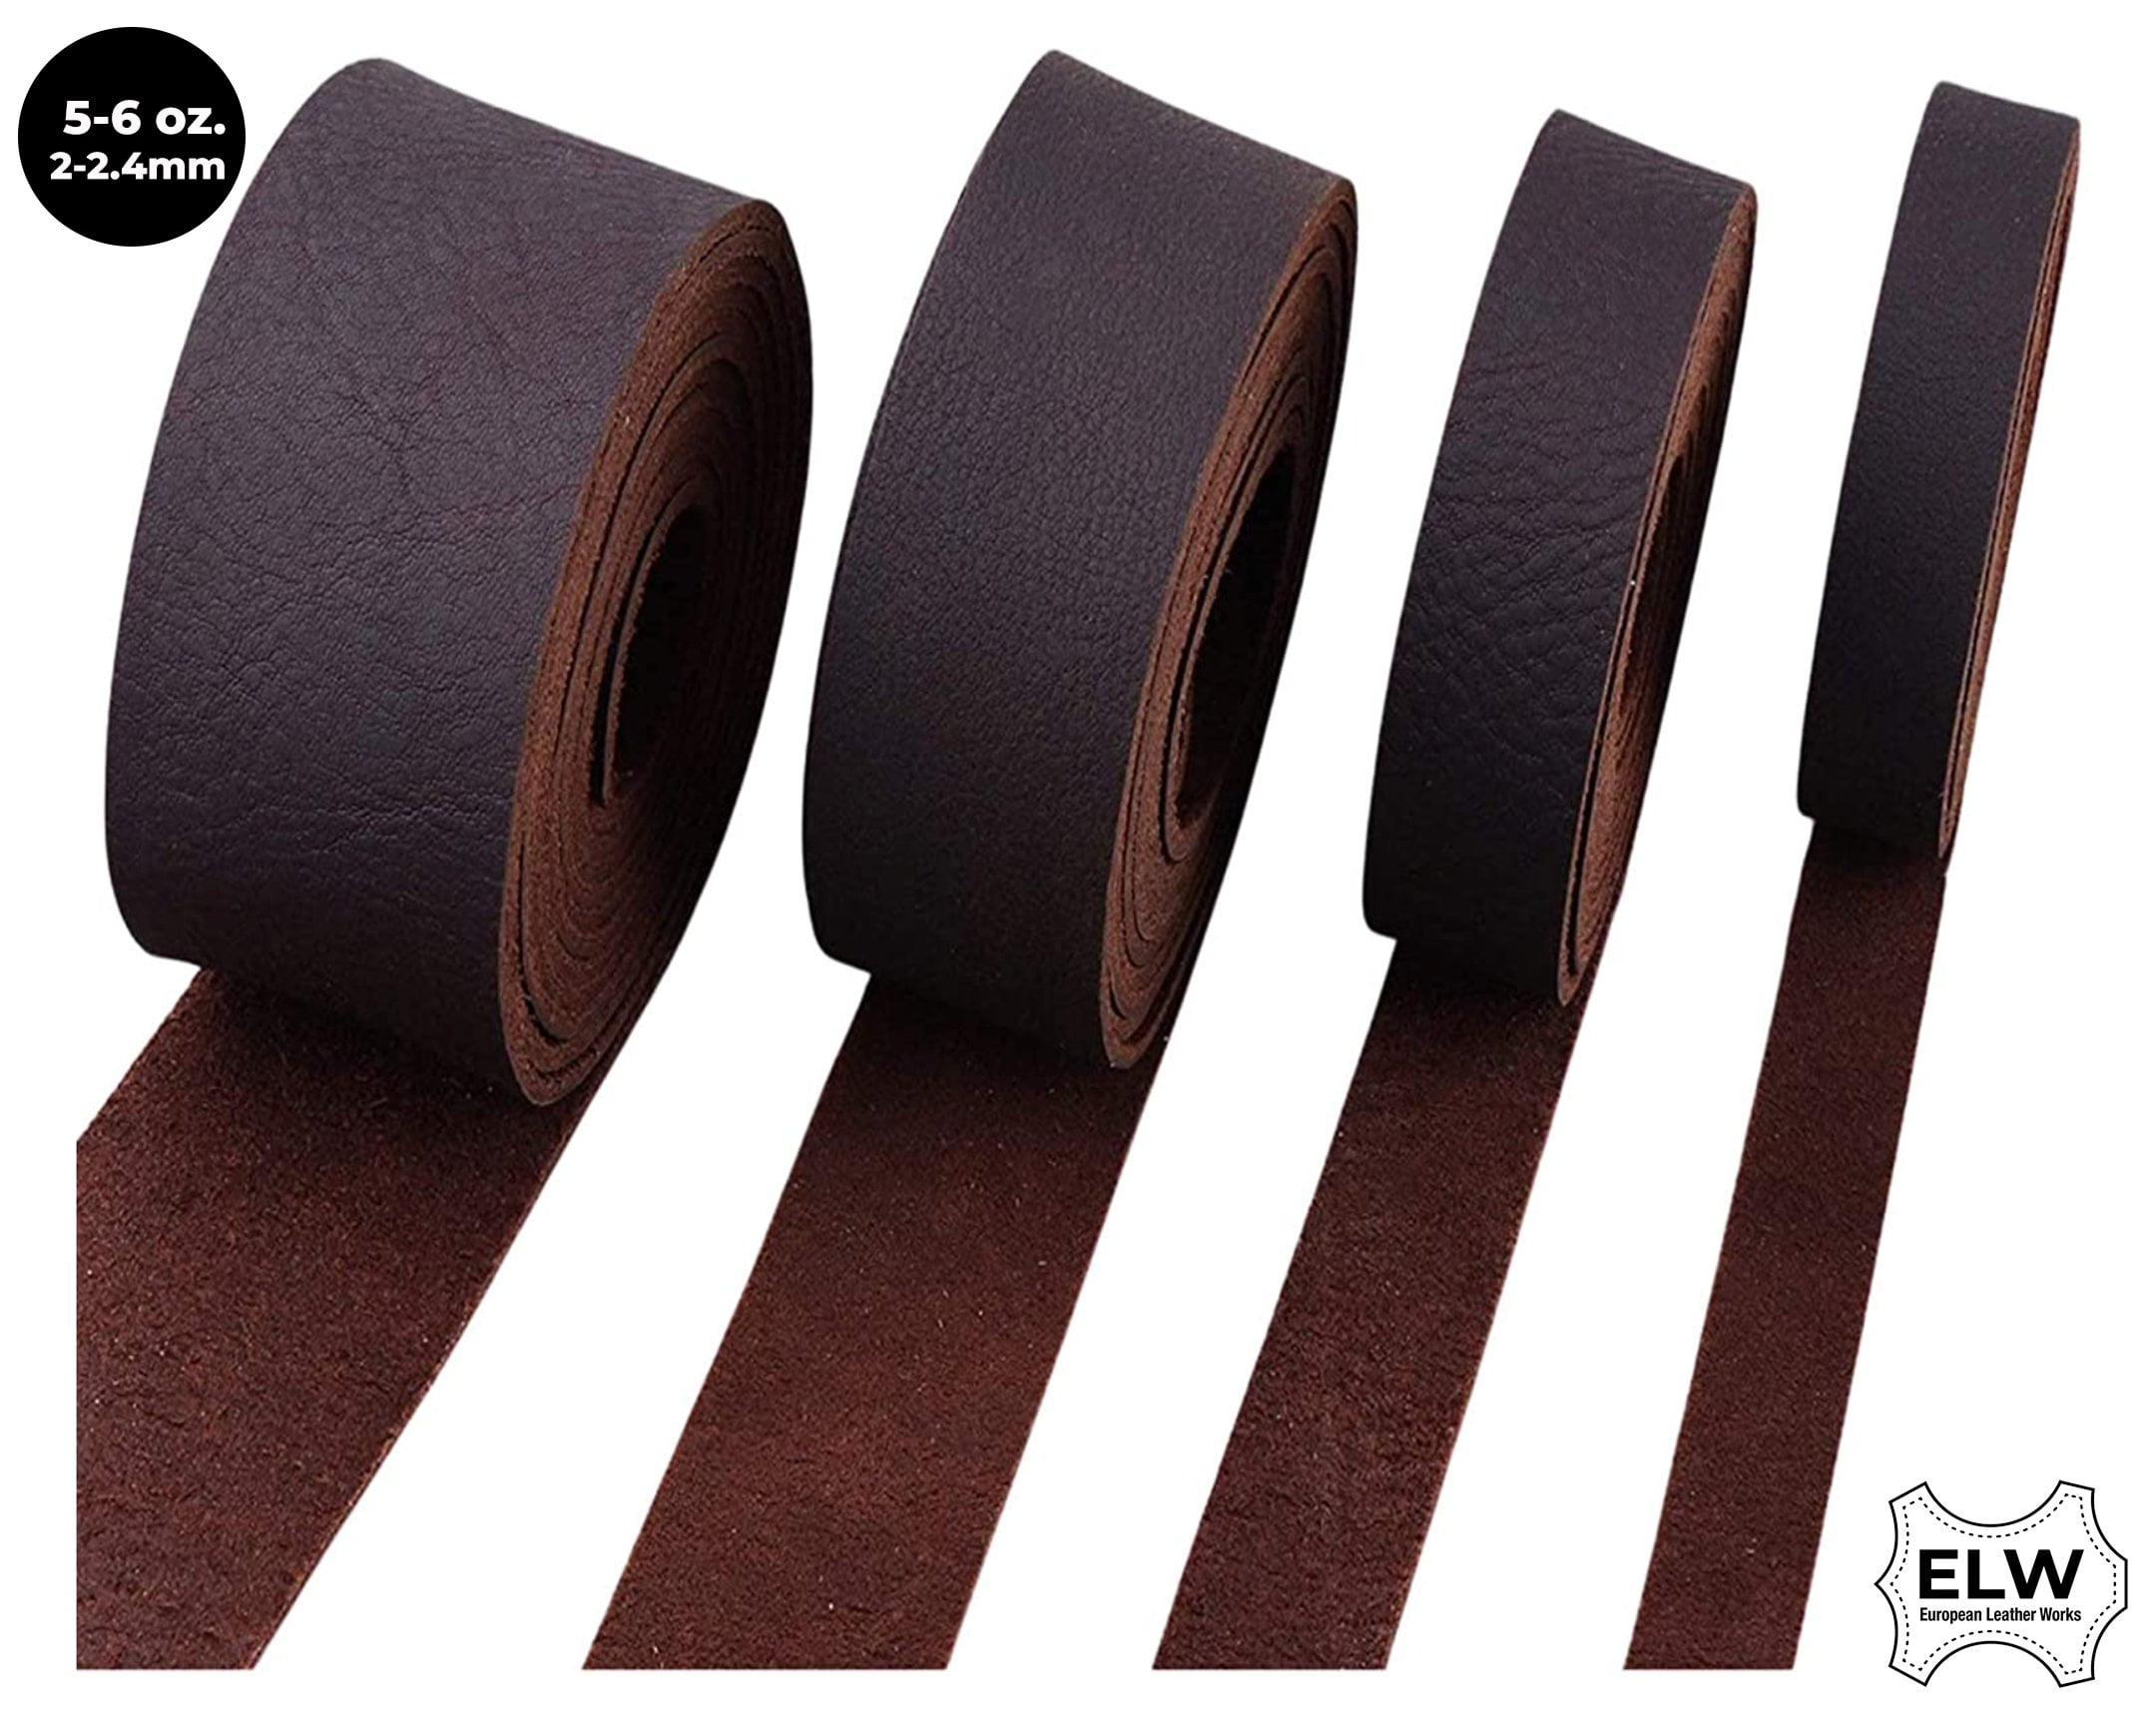 ELW Vegetable Tanned Leather Belt Blanks Strips Straps 5-6oz 2mm Thickness  Sizes 1/2 to 4 W X 72 L,Tooling Leather, Full Grain Veg Tan 